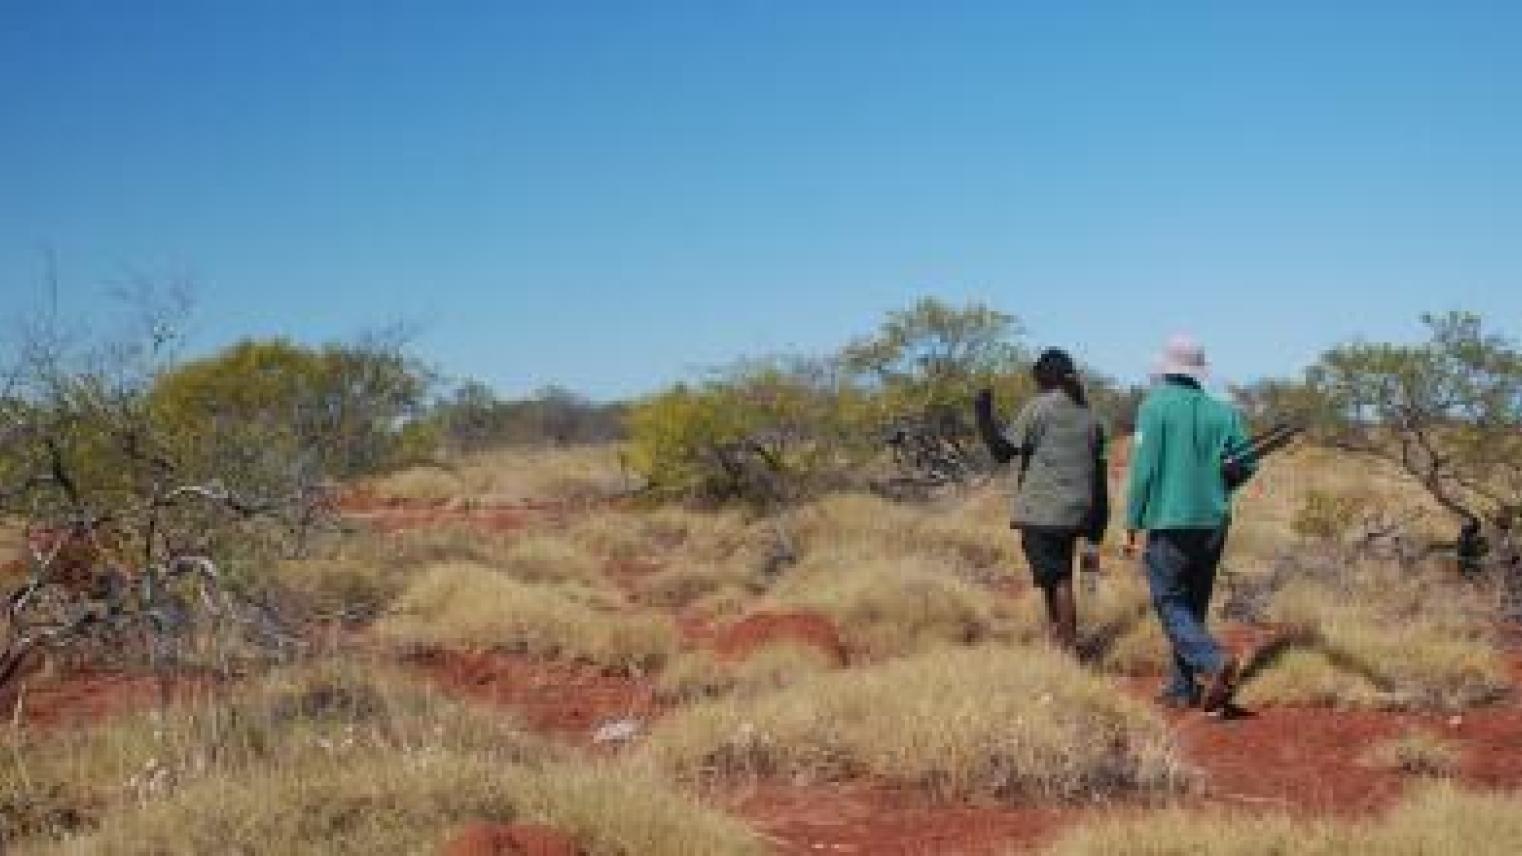 Searching for a sixth sense with Gurindji people - Meakins